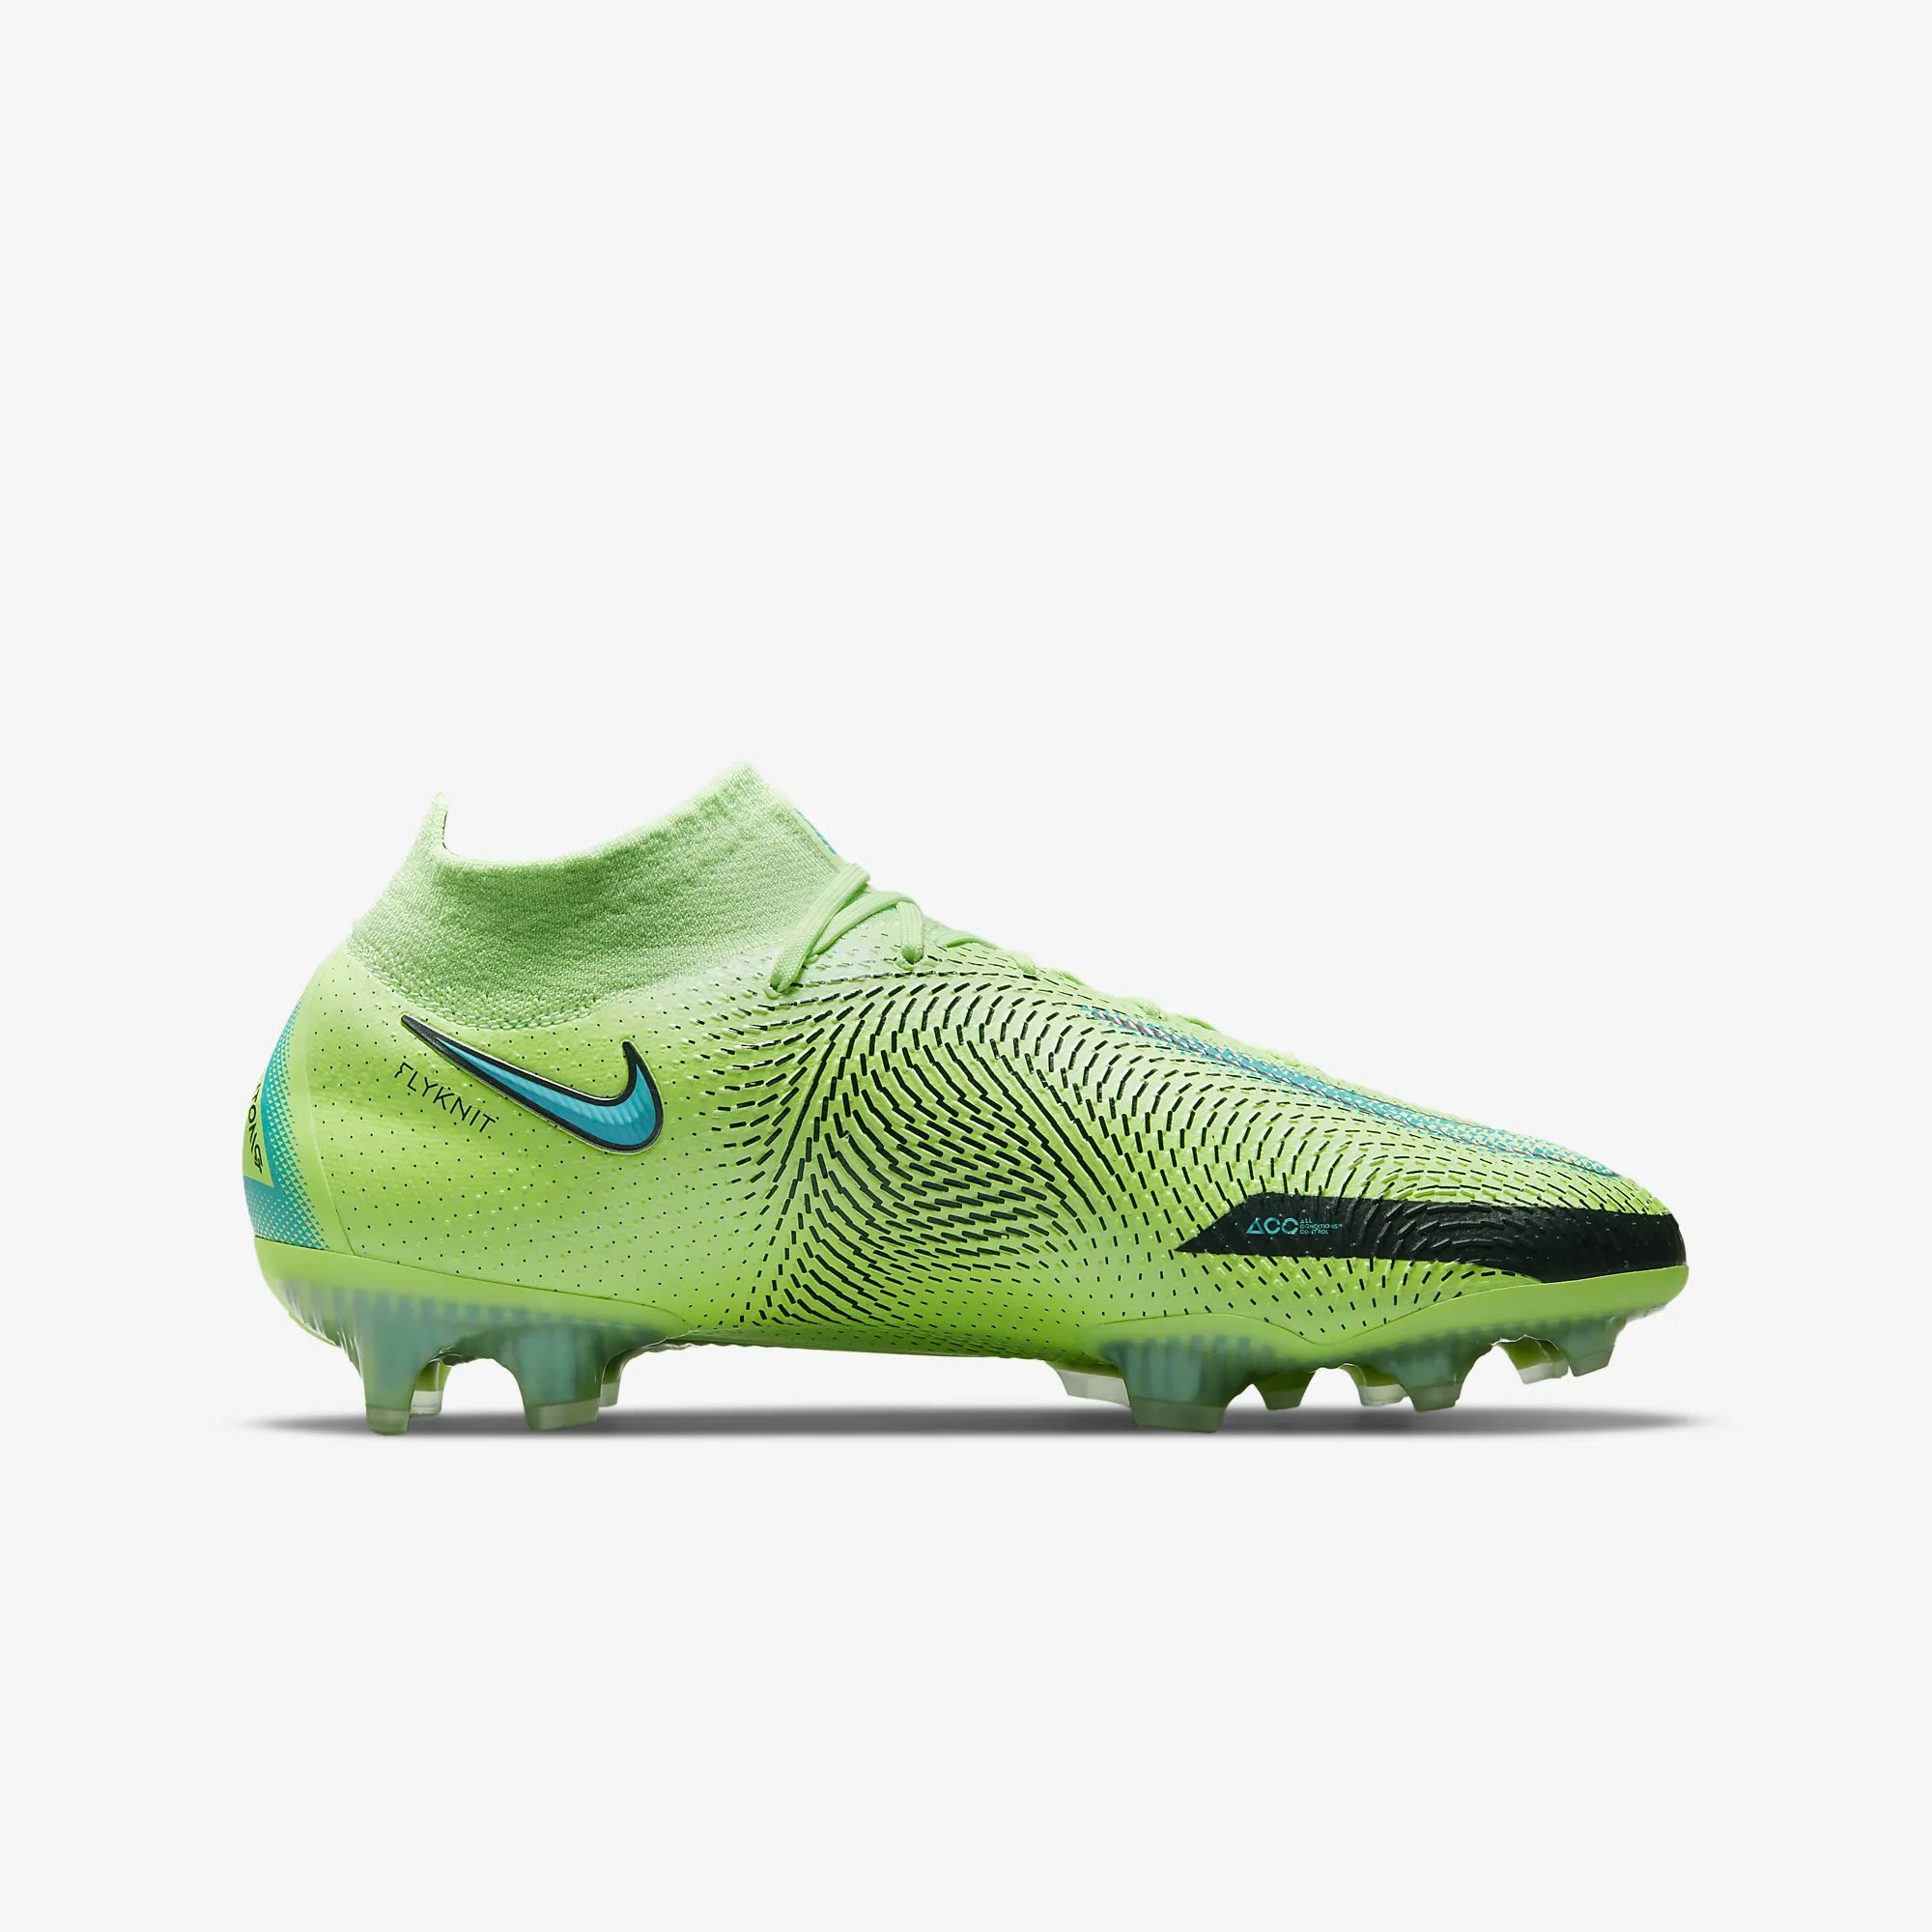 Nike Soccer Cleats Wallpapers - Wallpaper Cave